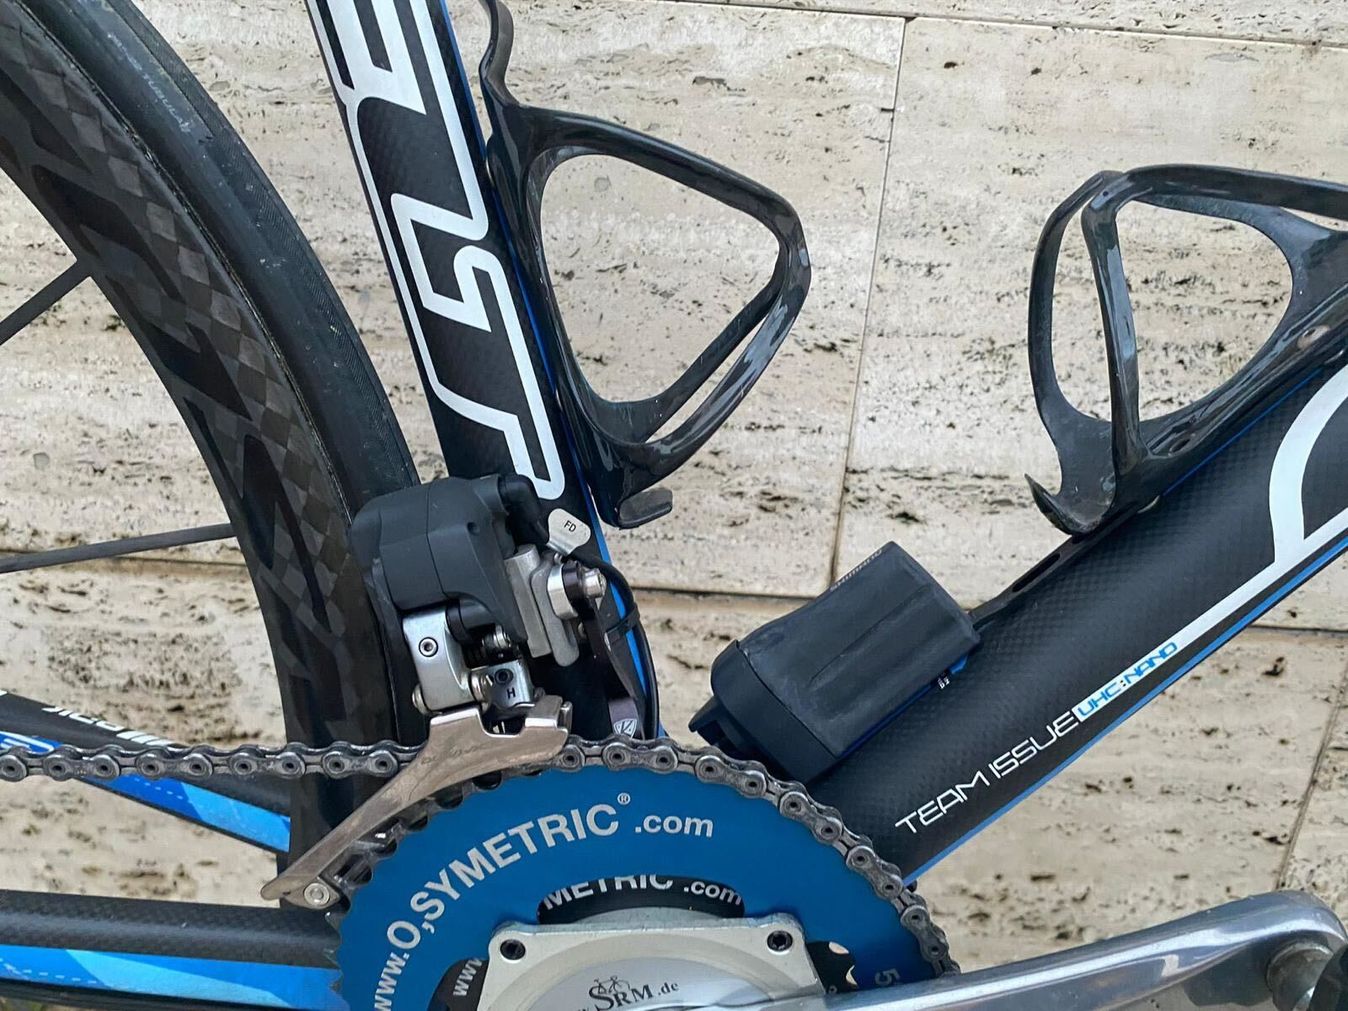 Unlike the fully integrated versions of Di2 that we have grown accustomed to the first generation had an externally mounted battery